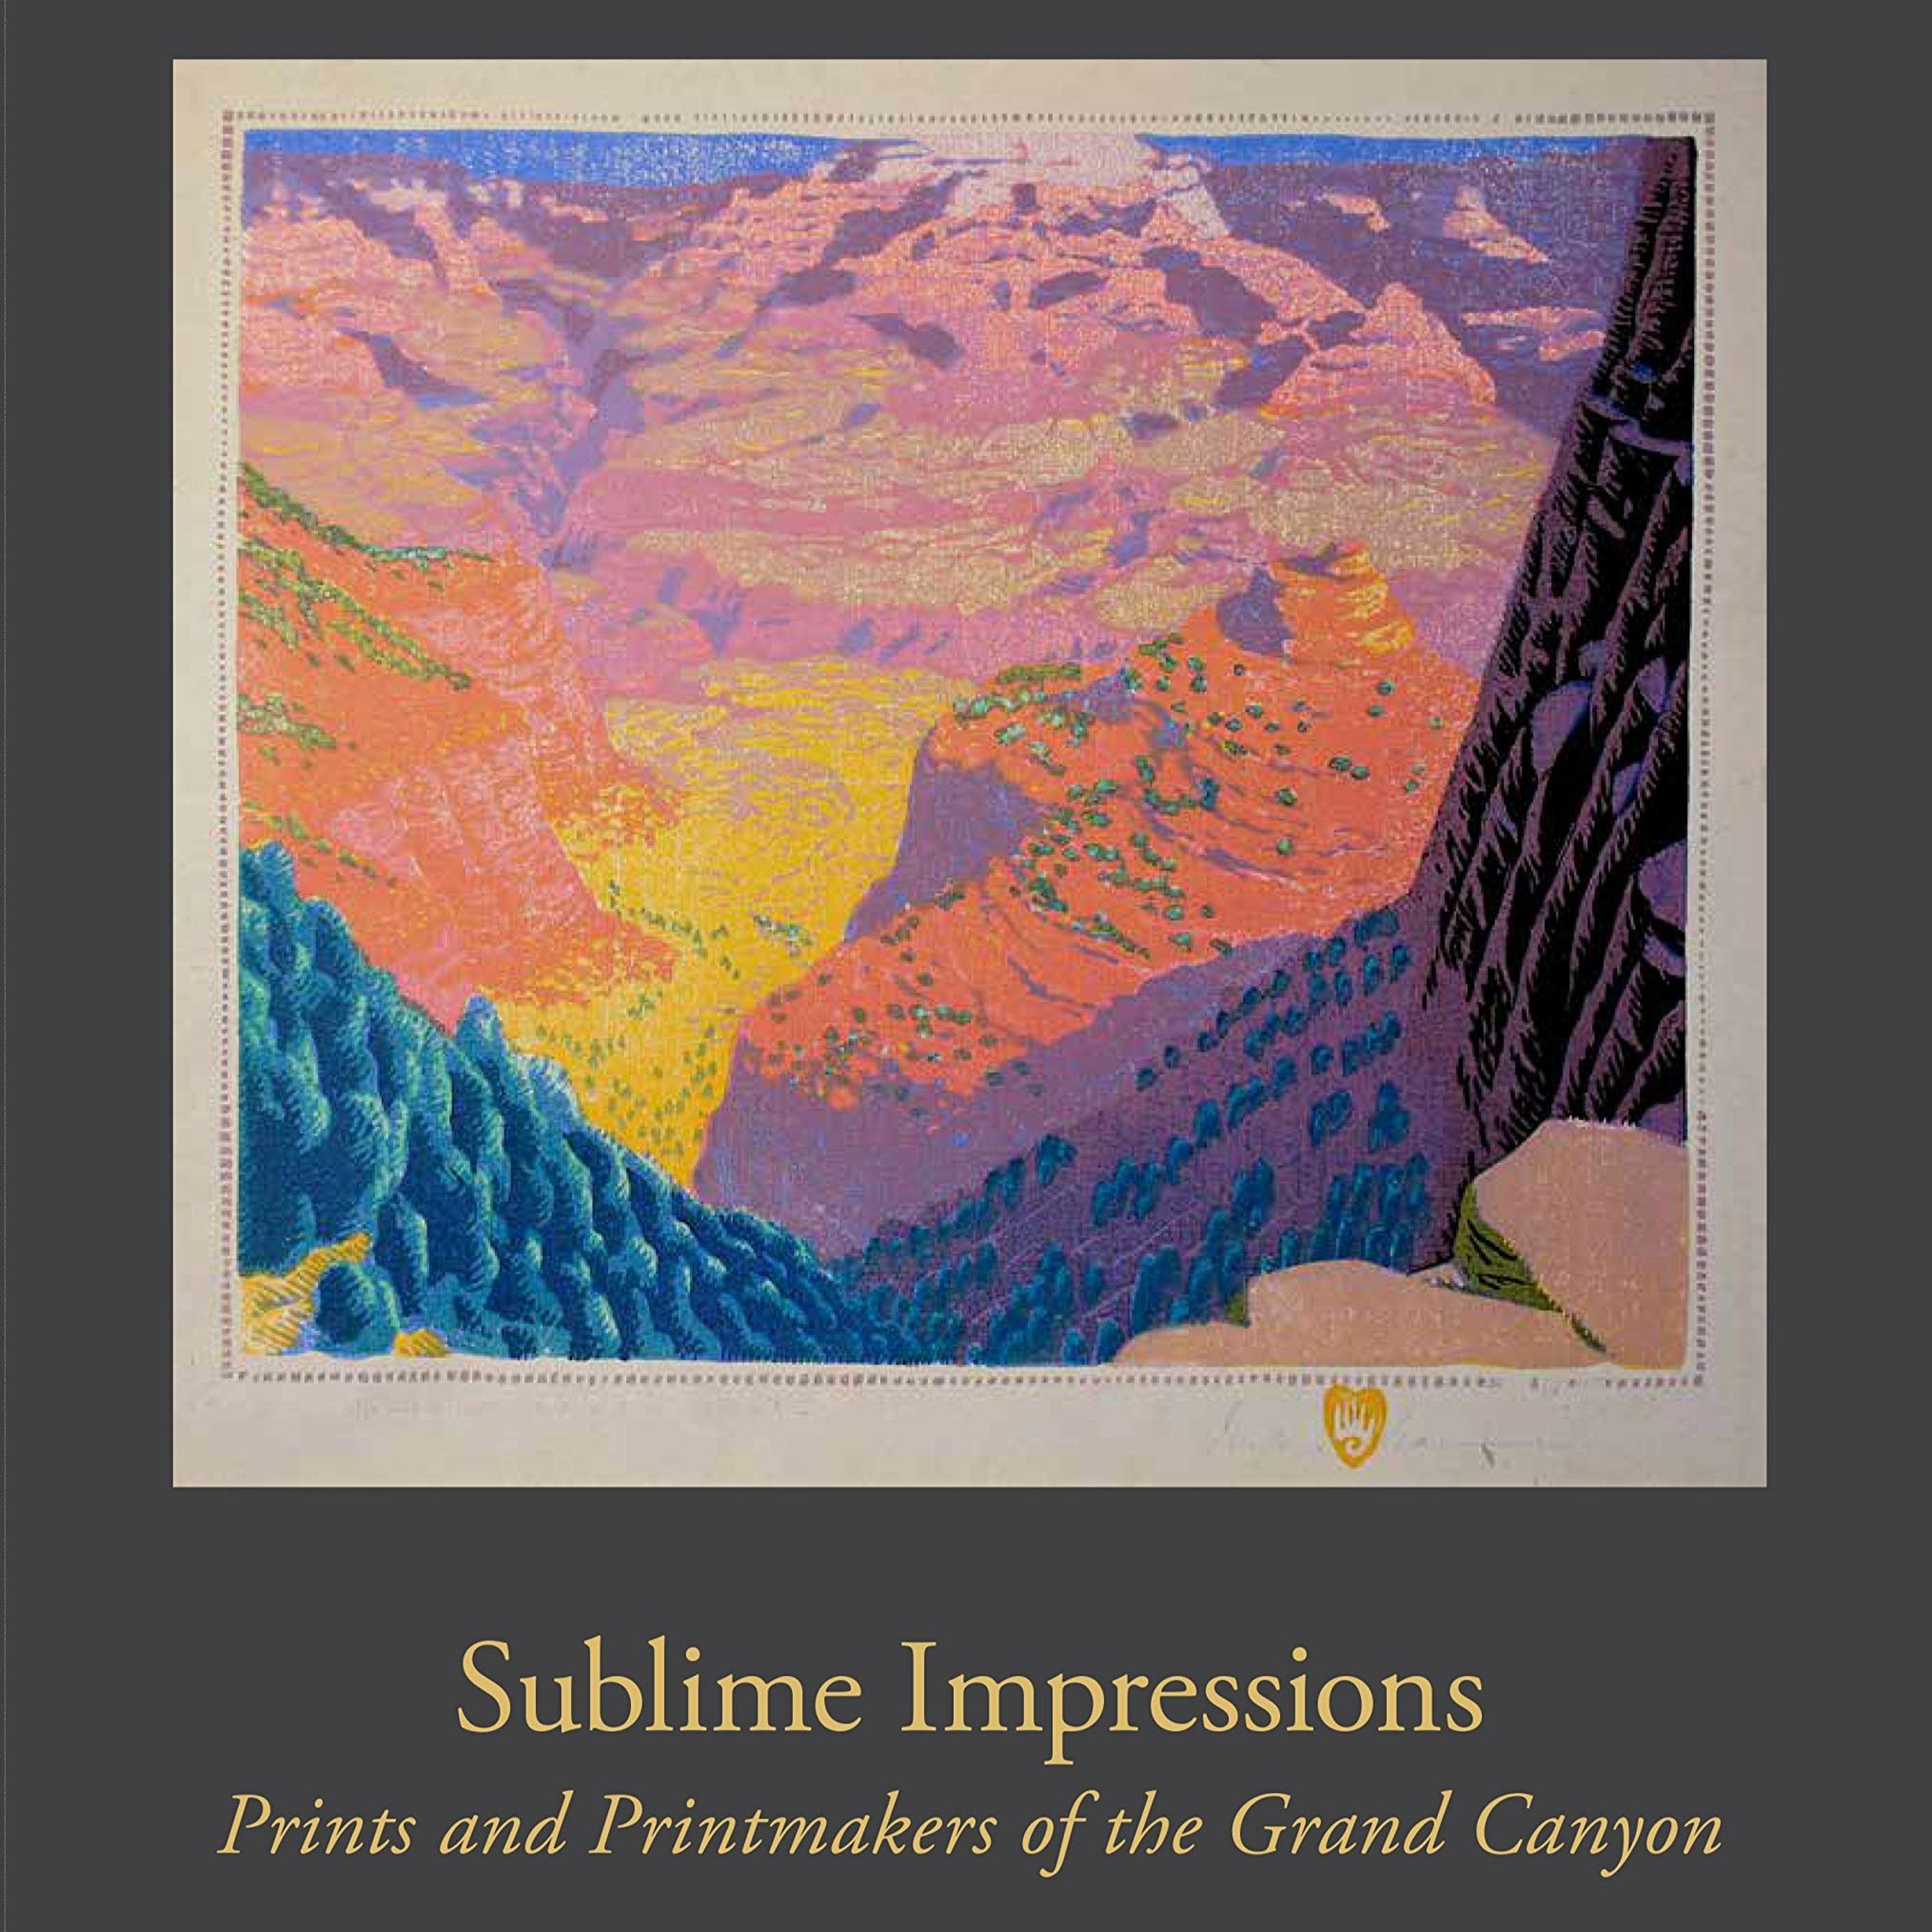 Lindsay Leard-Coolidge, “Sublime Impressions: Prints and Printmakers of the Grand Canyon”